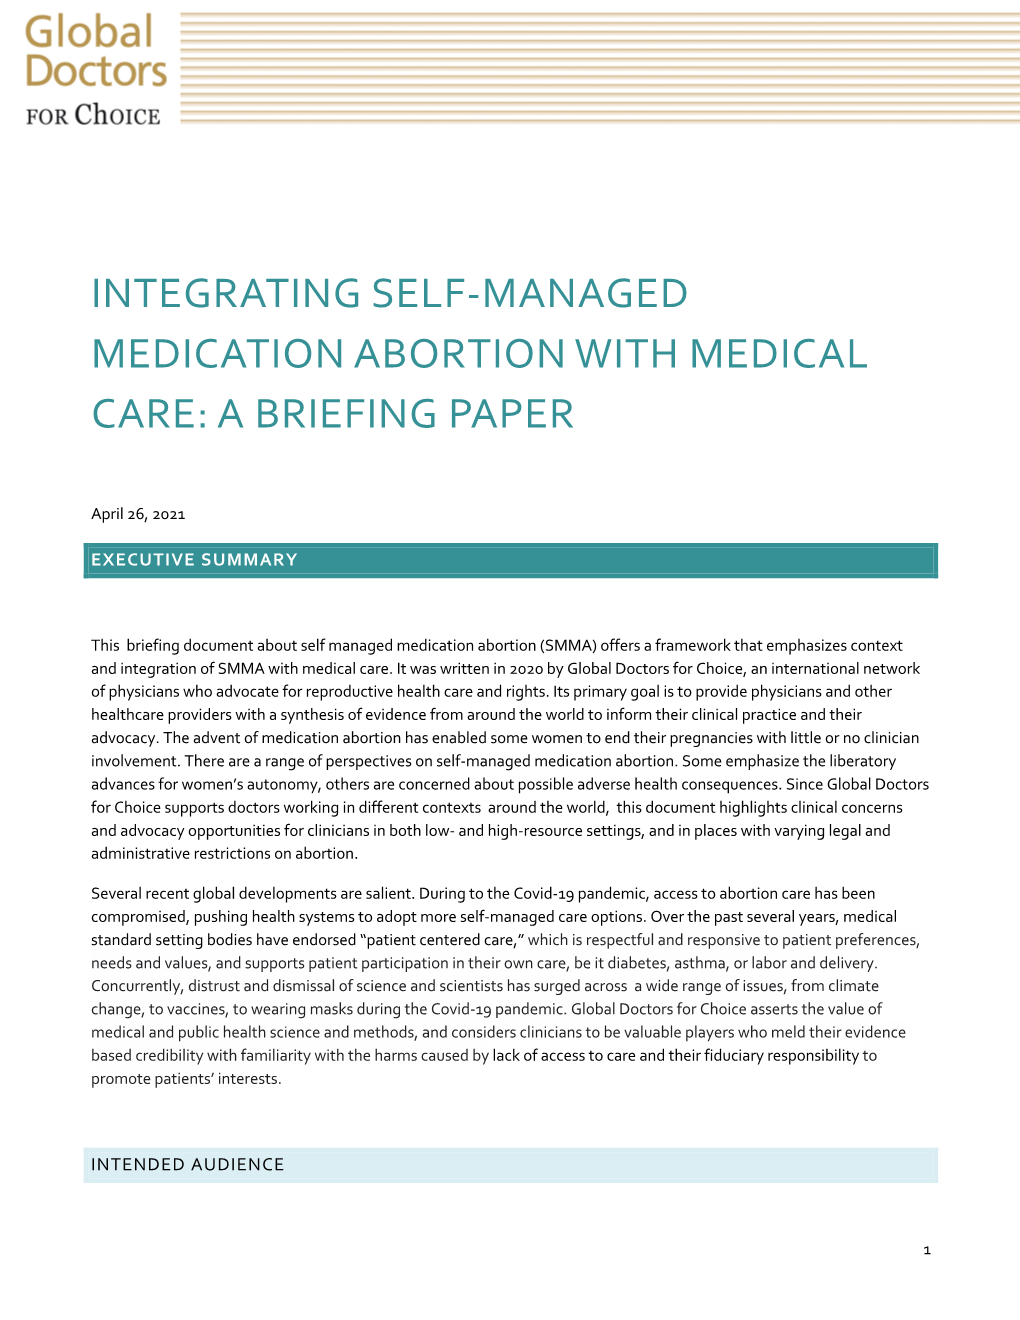 Integrating Self-Managed Medication Abortion with Medical Care: a Briefing Paper